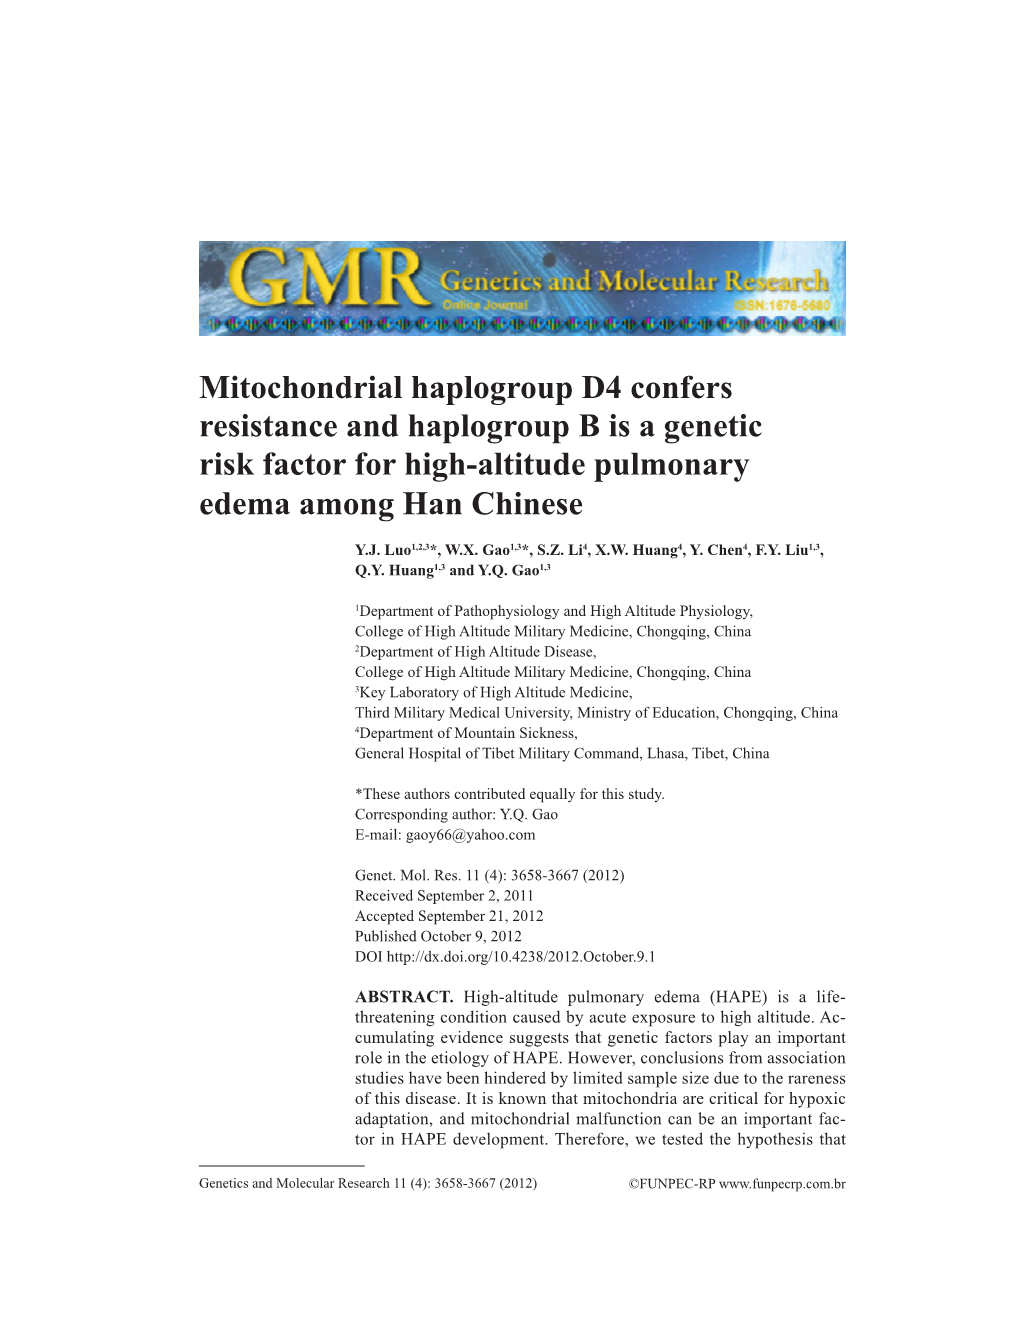 Mitochondrial Haplogroup D4 Confers Resistance and Haplogroup B Is a Genetic Risk Factor for High-Altitude Pulmonary Edema Among Han Chinese